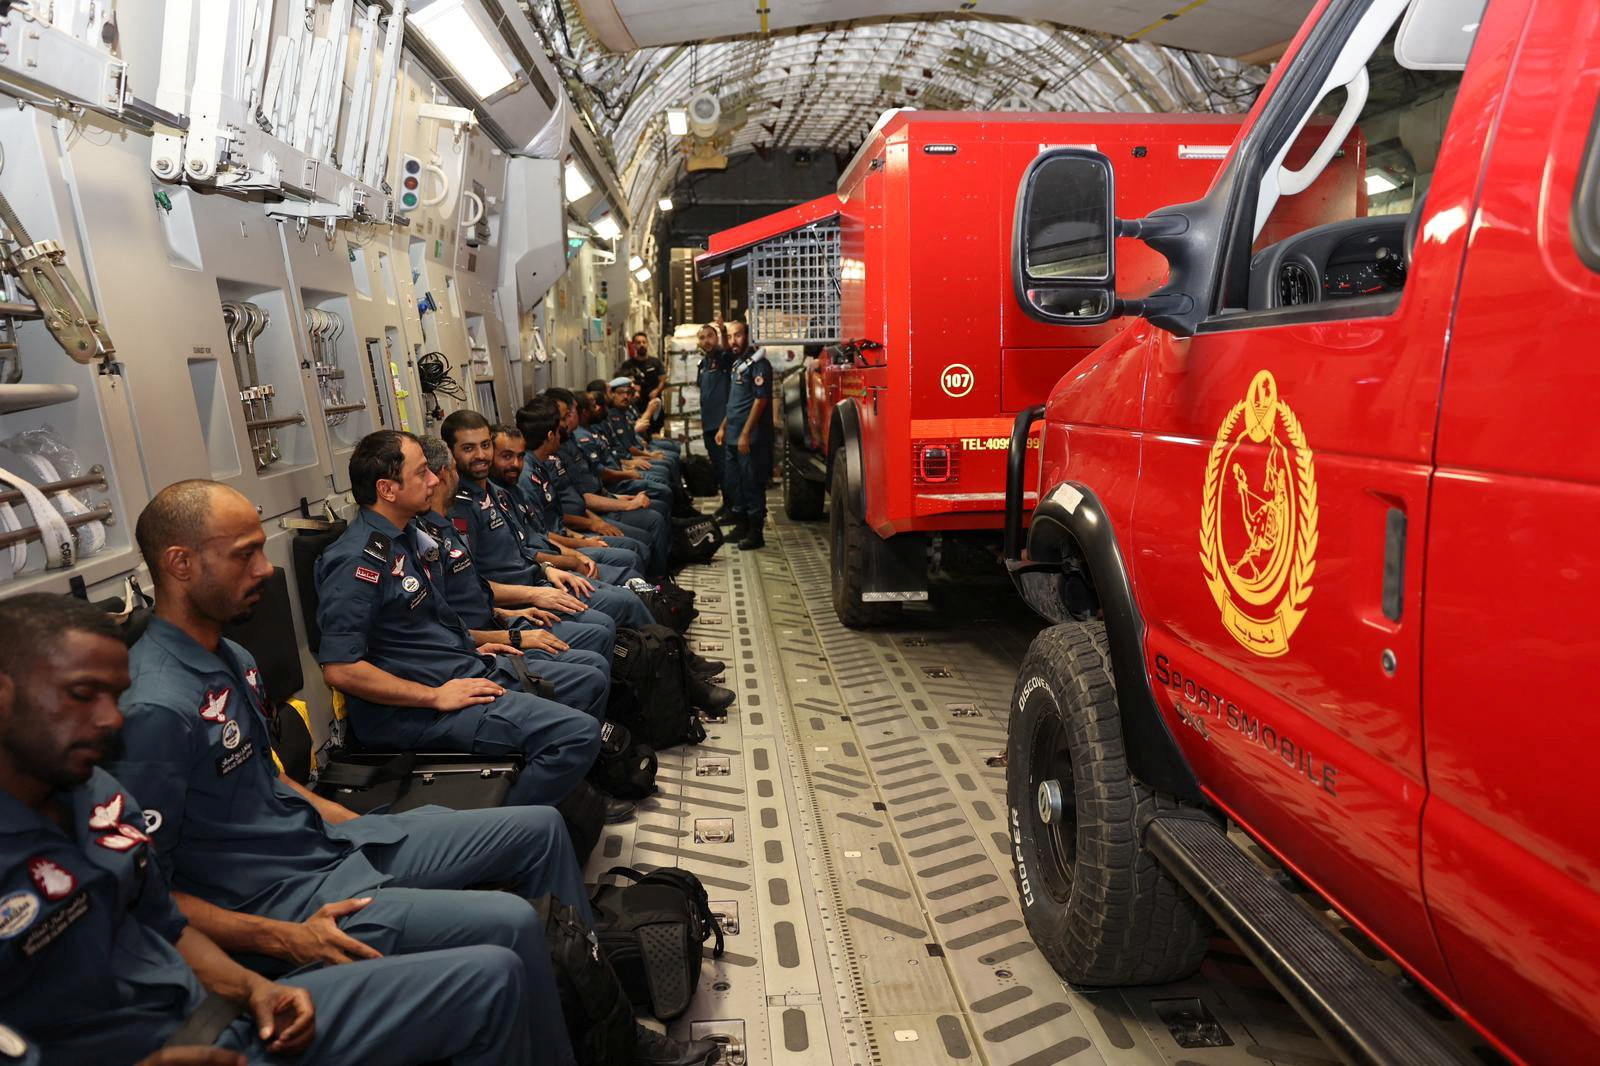 Qatari International Search and Rescue Group personnel and aid are seen onboard a military cargo plane destined to Morocco to provide support on the ground, following an earthquake that struck the country